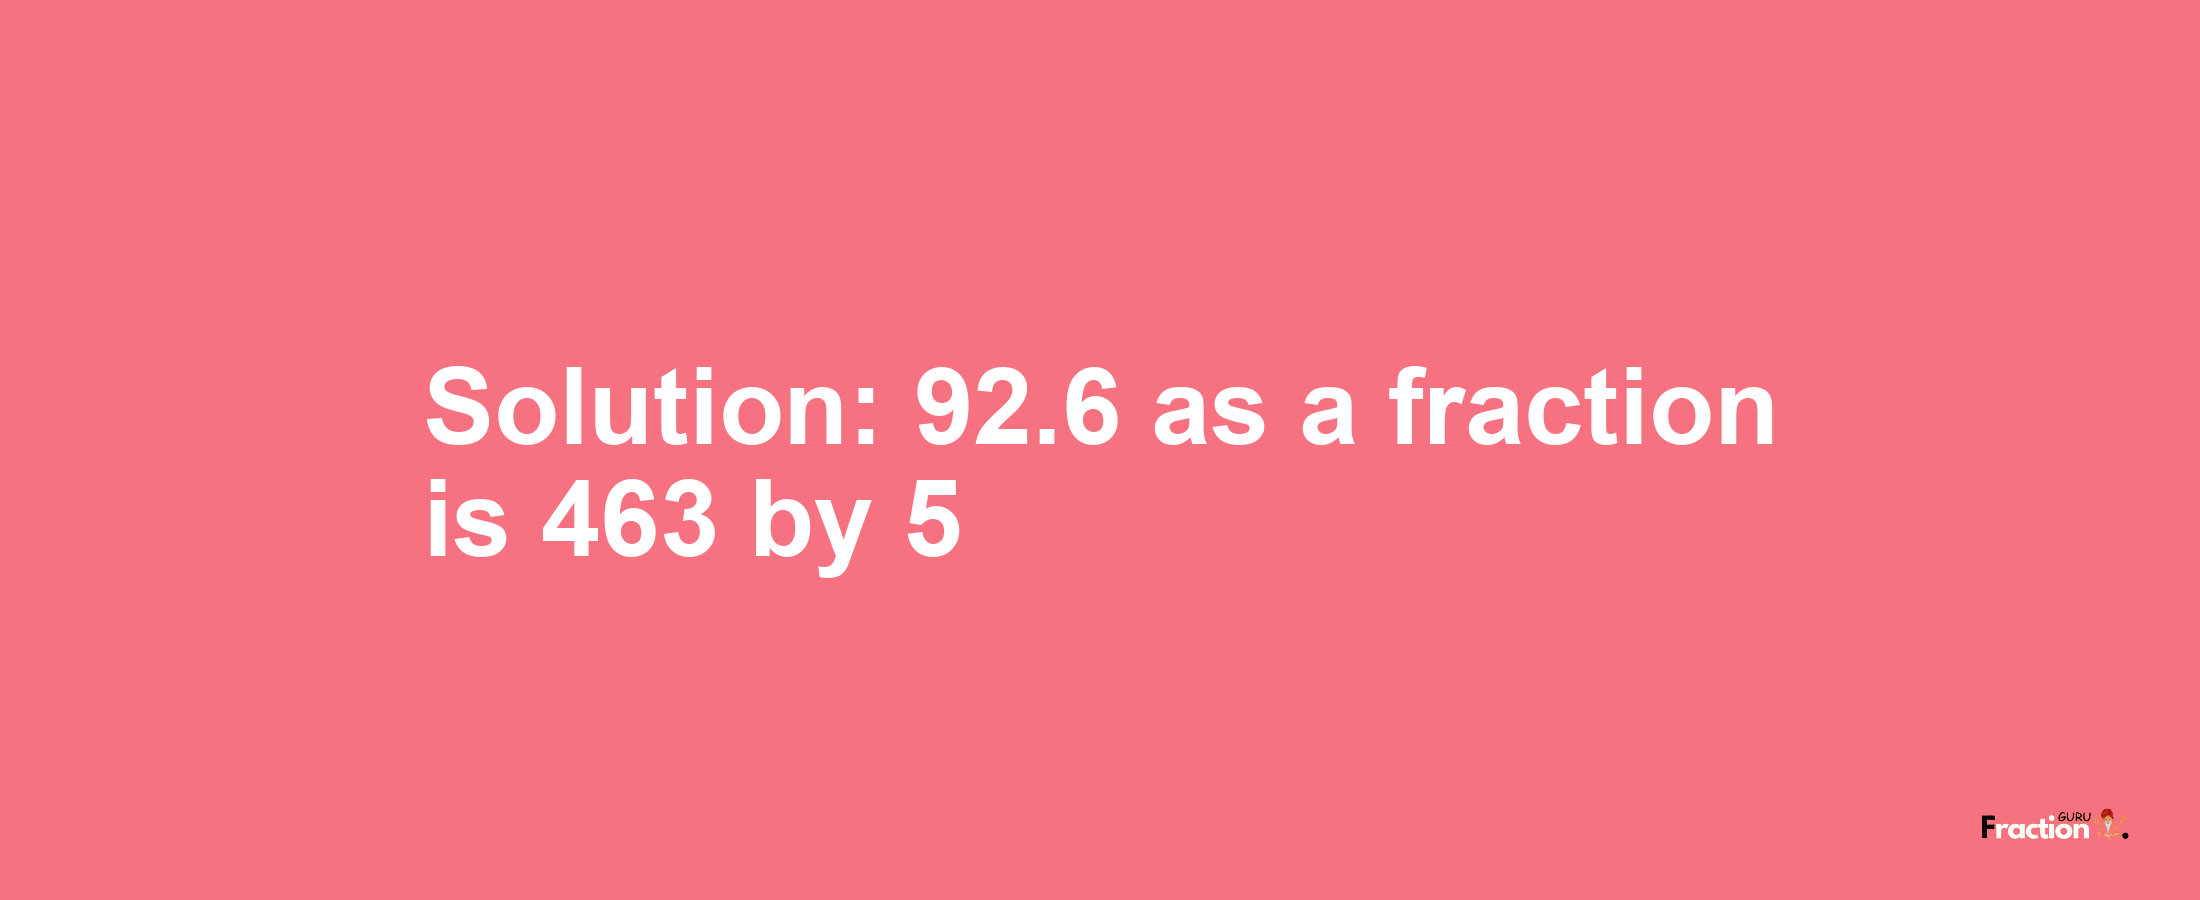 Solution:92.6 as a fraction is 463/5